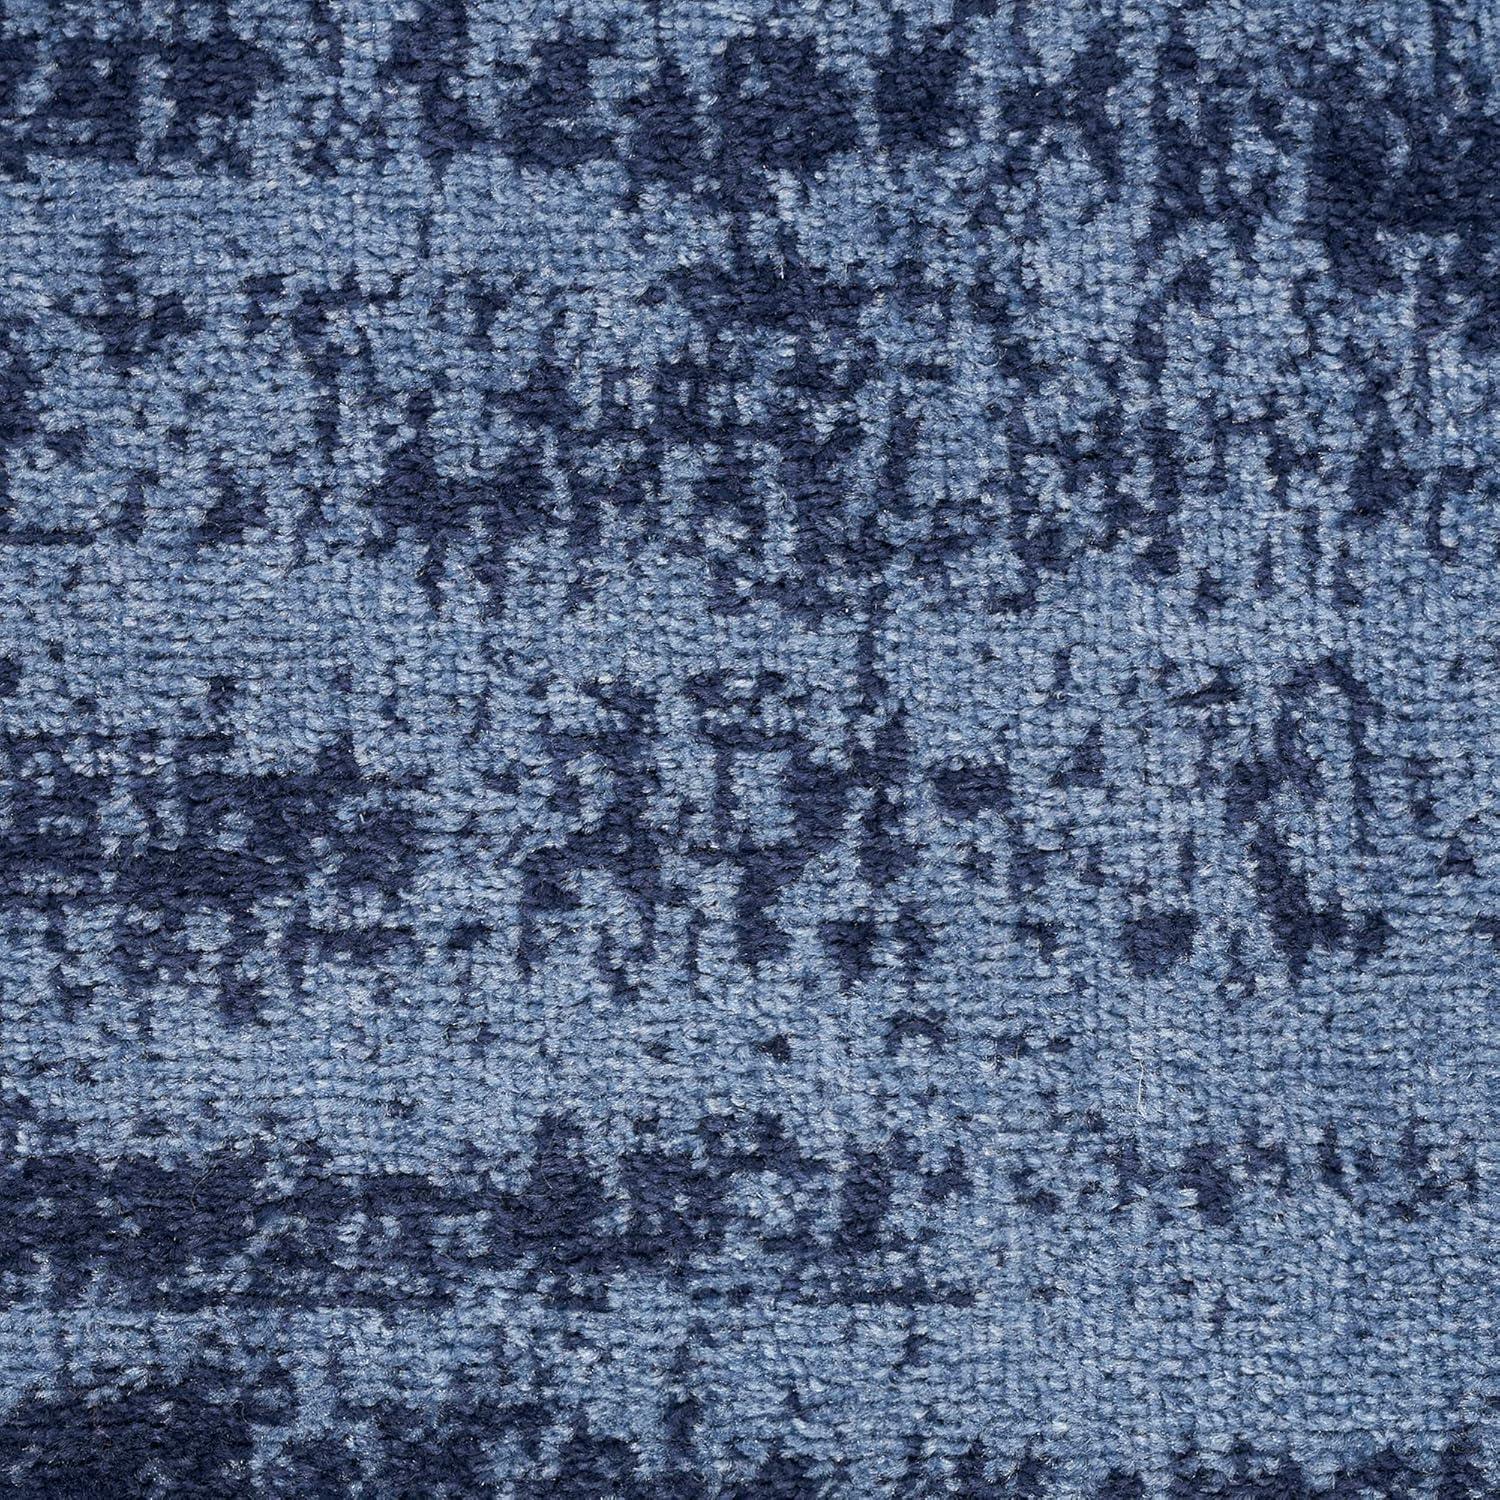 Denim Blue Abstract 5' x 7' Easy-Care Synthetic Outdoor Rug